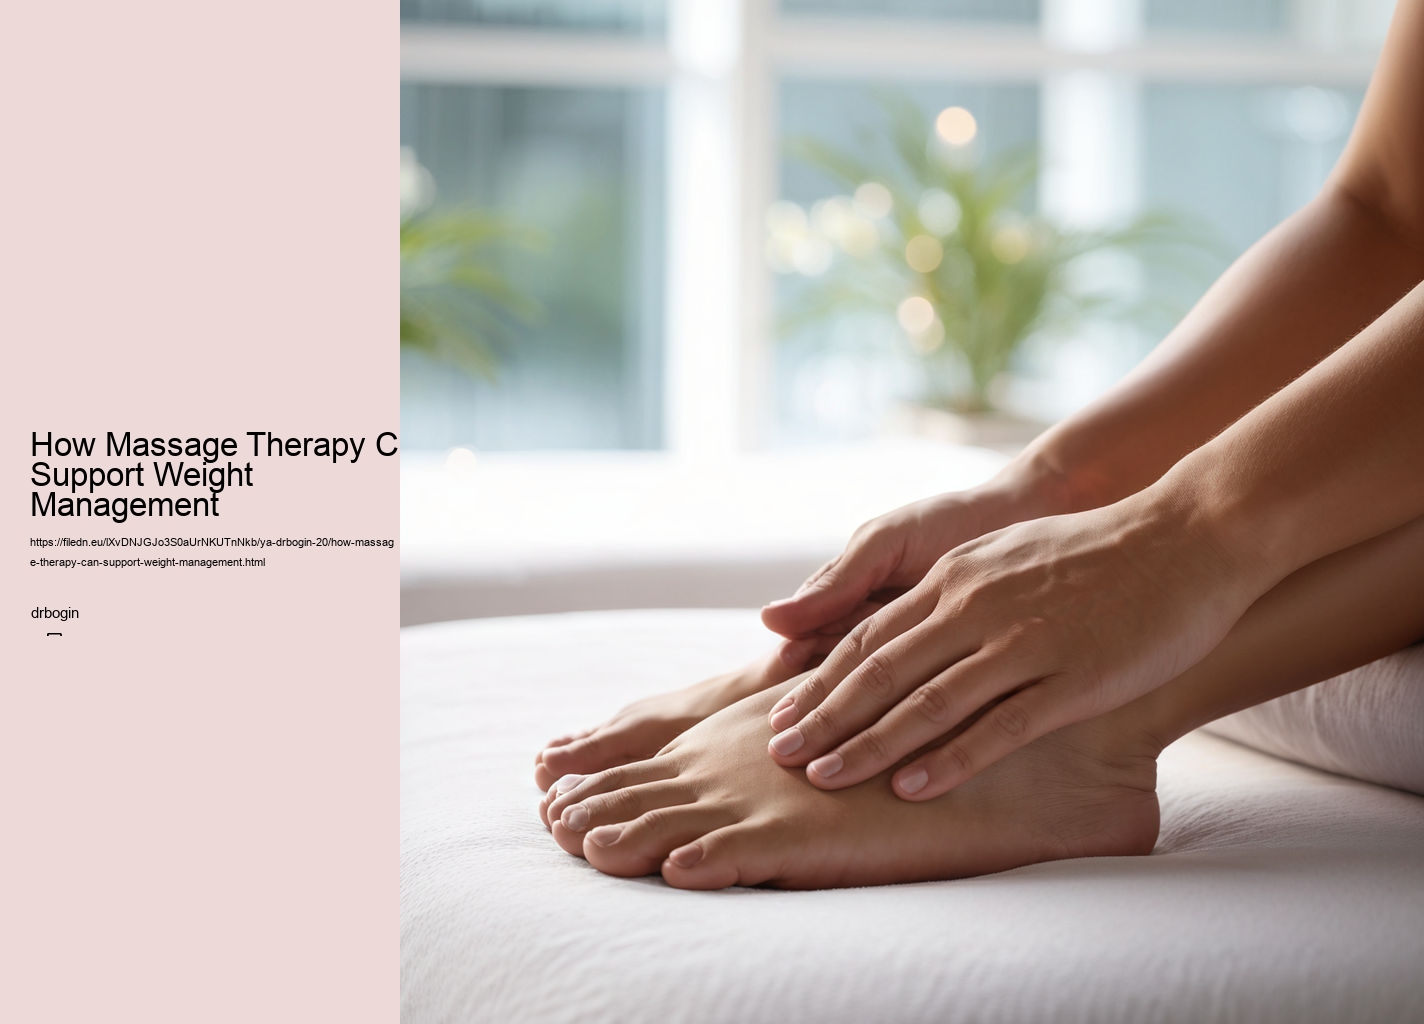 How Massage Therapy Can Support Weight Management